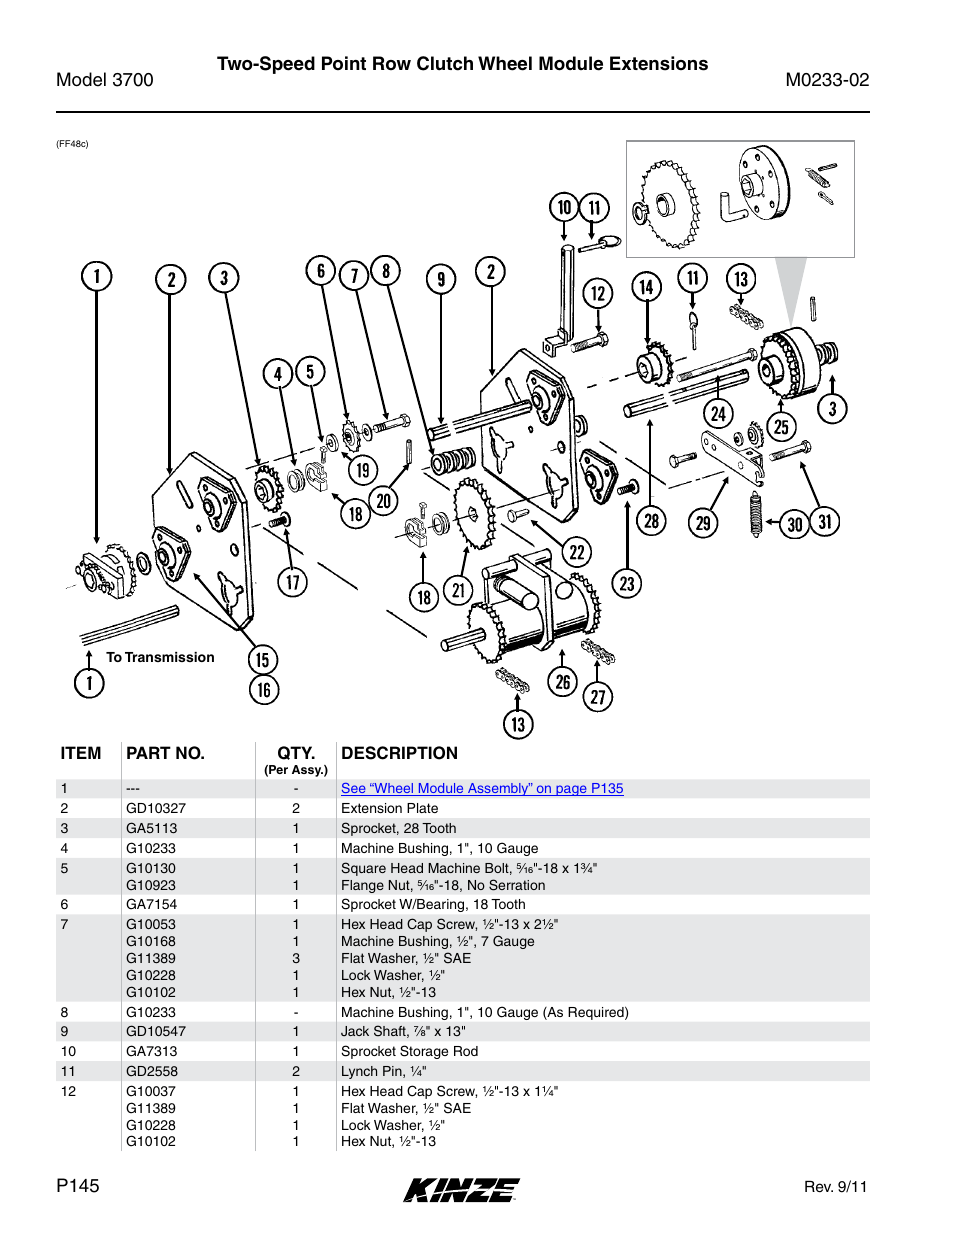 Two-speed point row clutch wheel module extensions | Kinze 3700 Front Folding Planter Rev. 6/14 User Manual | Page 148 / 284